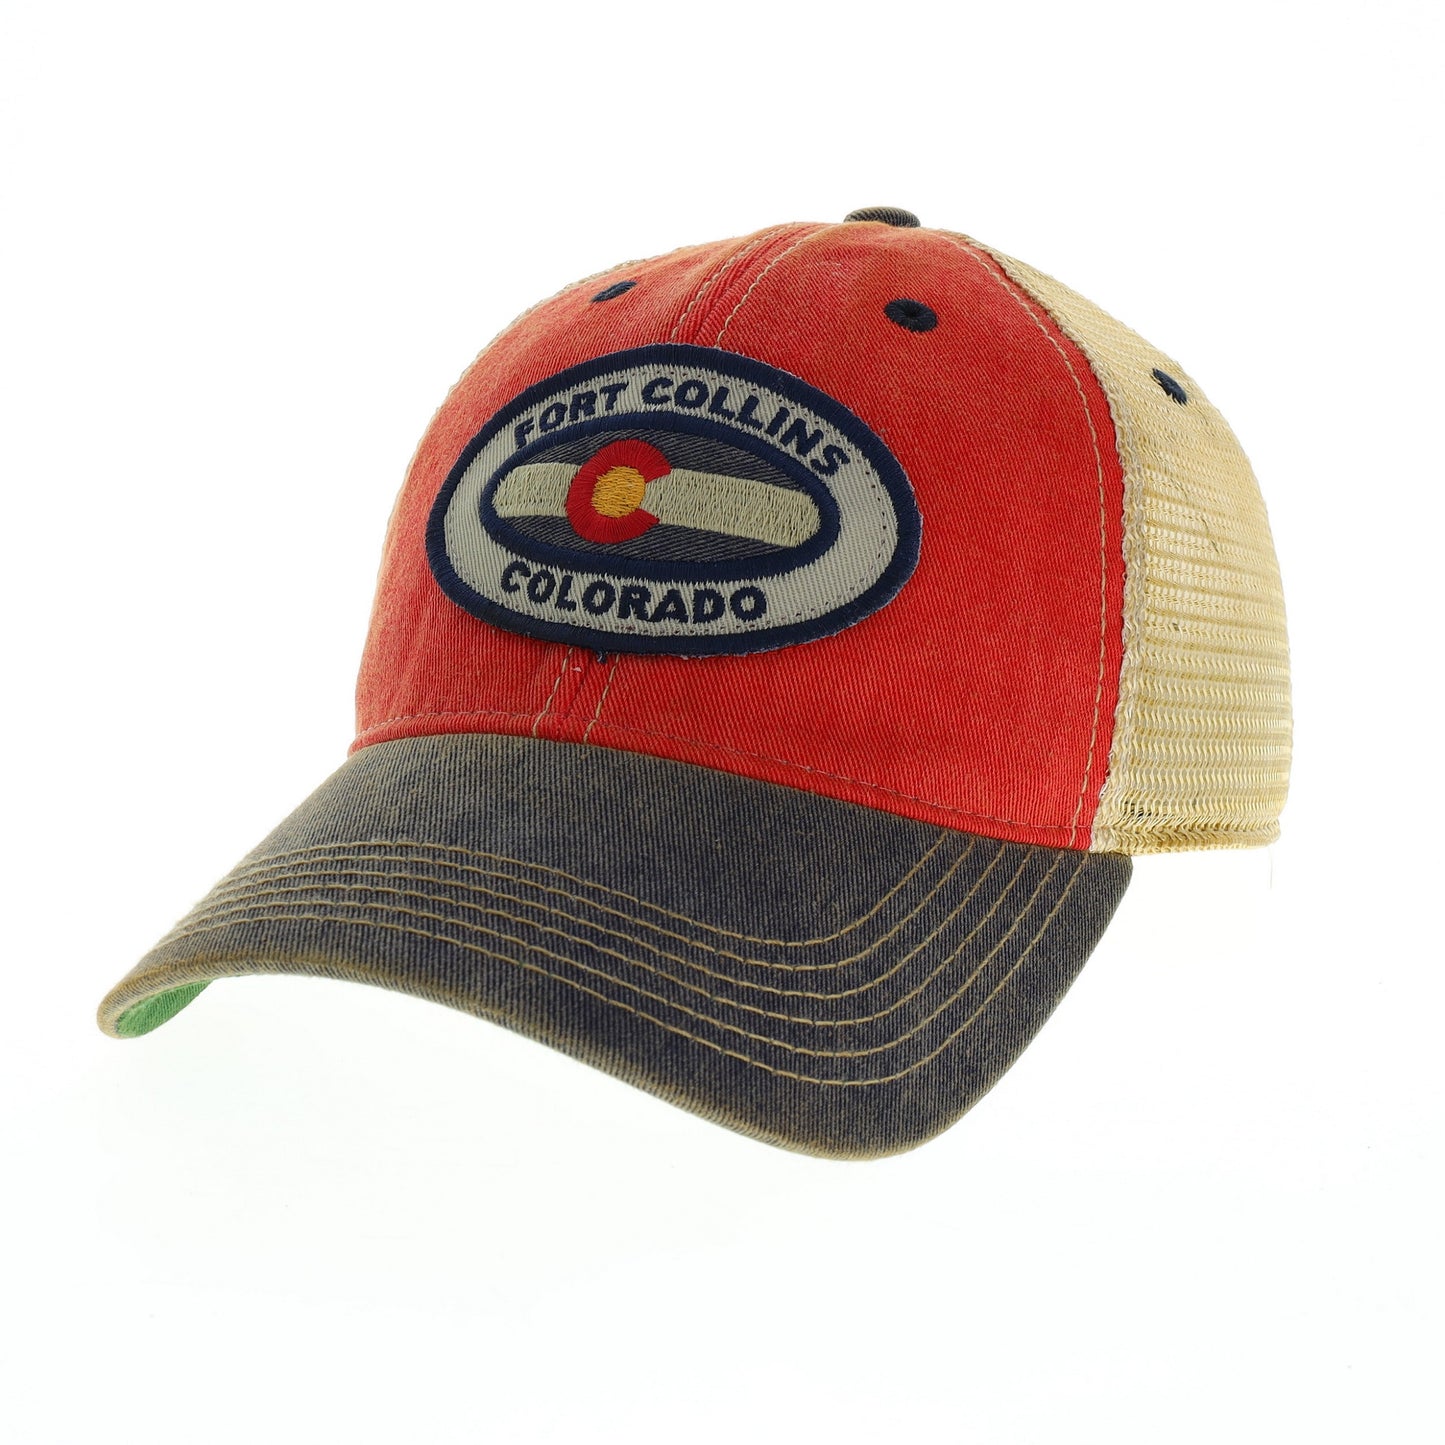 FORT COLLINS COLORADO OVAL PATCH 2-TONE TRUCKER - RED/NAVY